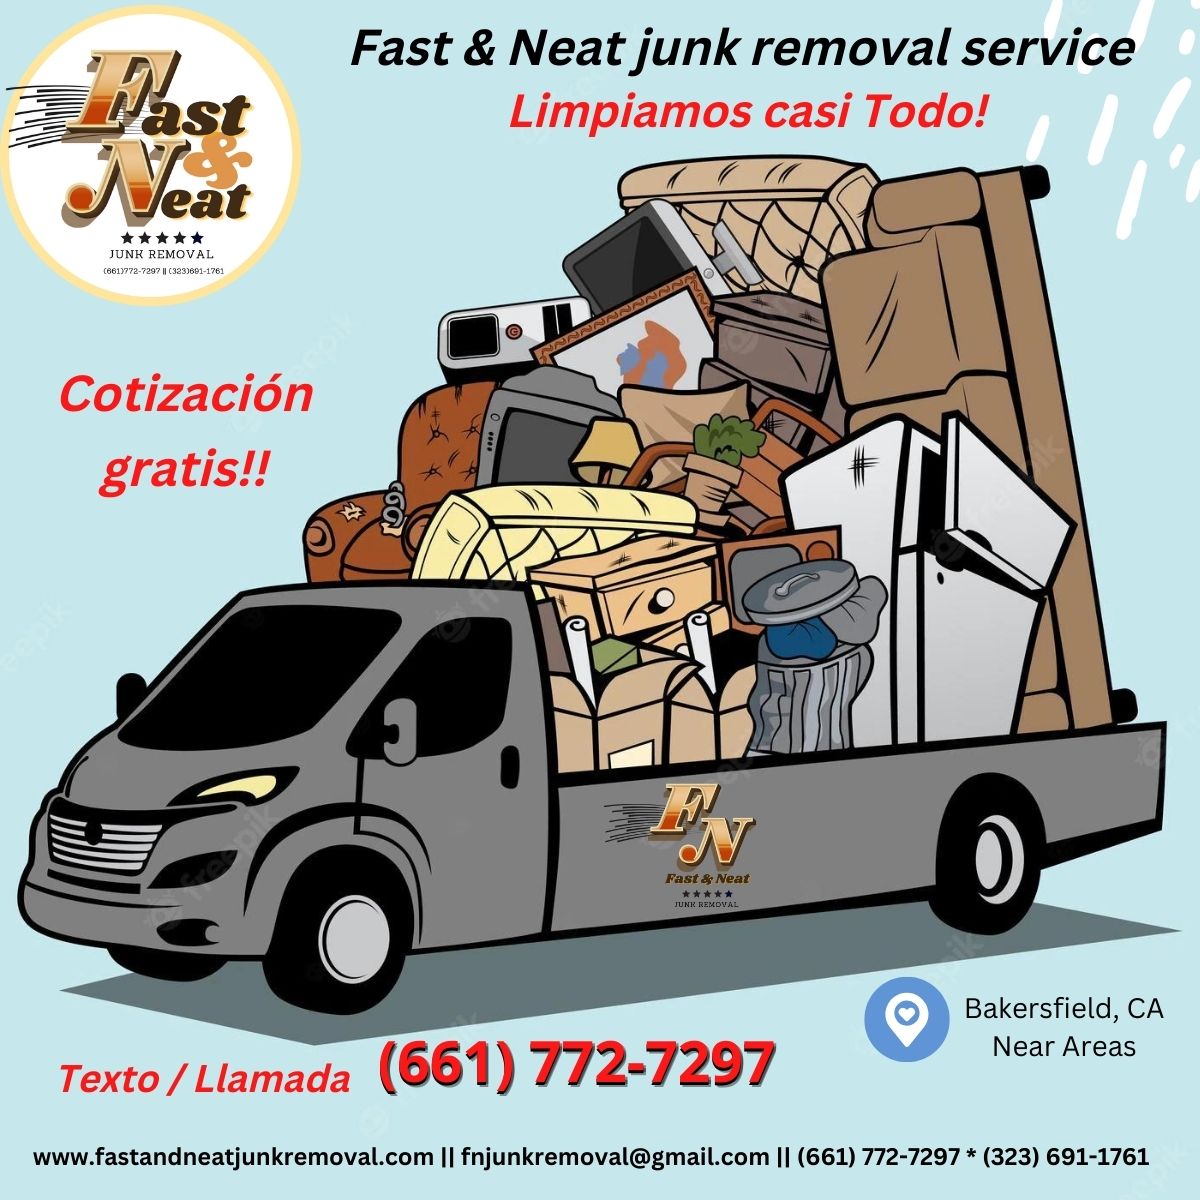 Limpiamos casi Todo Fast and Neat junk removal